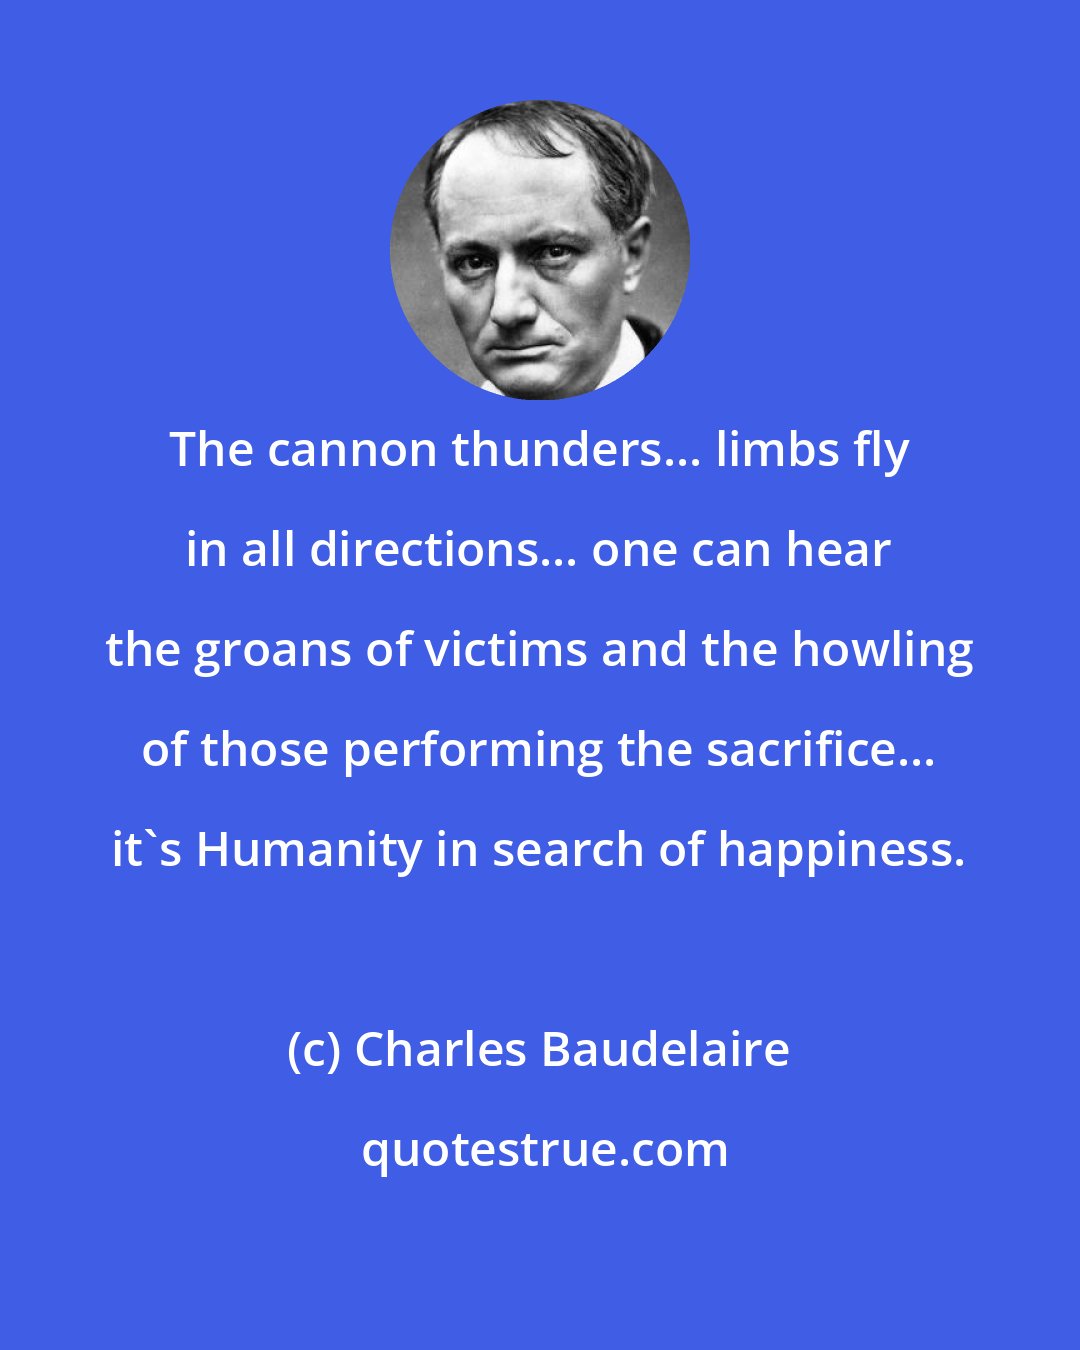 Charles Baudelaire: The cannon thunders... limbs fly in all directions... one can hear the groans of victims and the howling of those performing the sacrifice... it's Humanity in search of happiness.